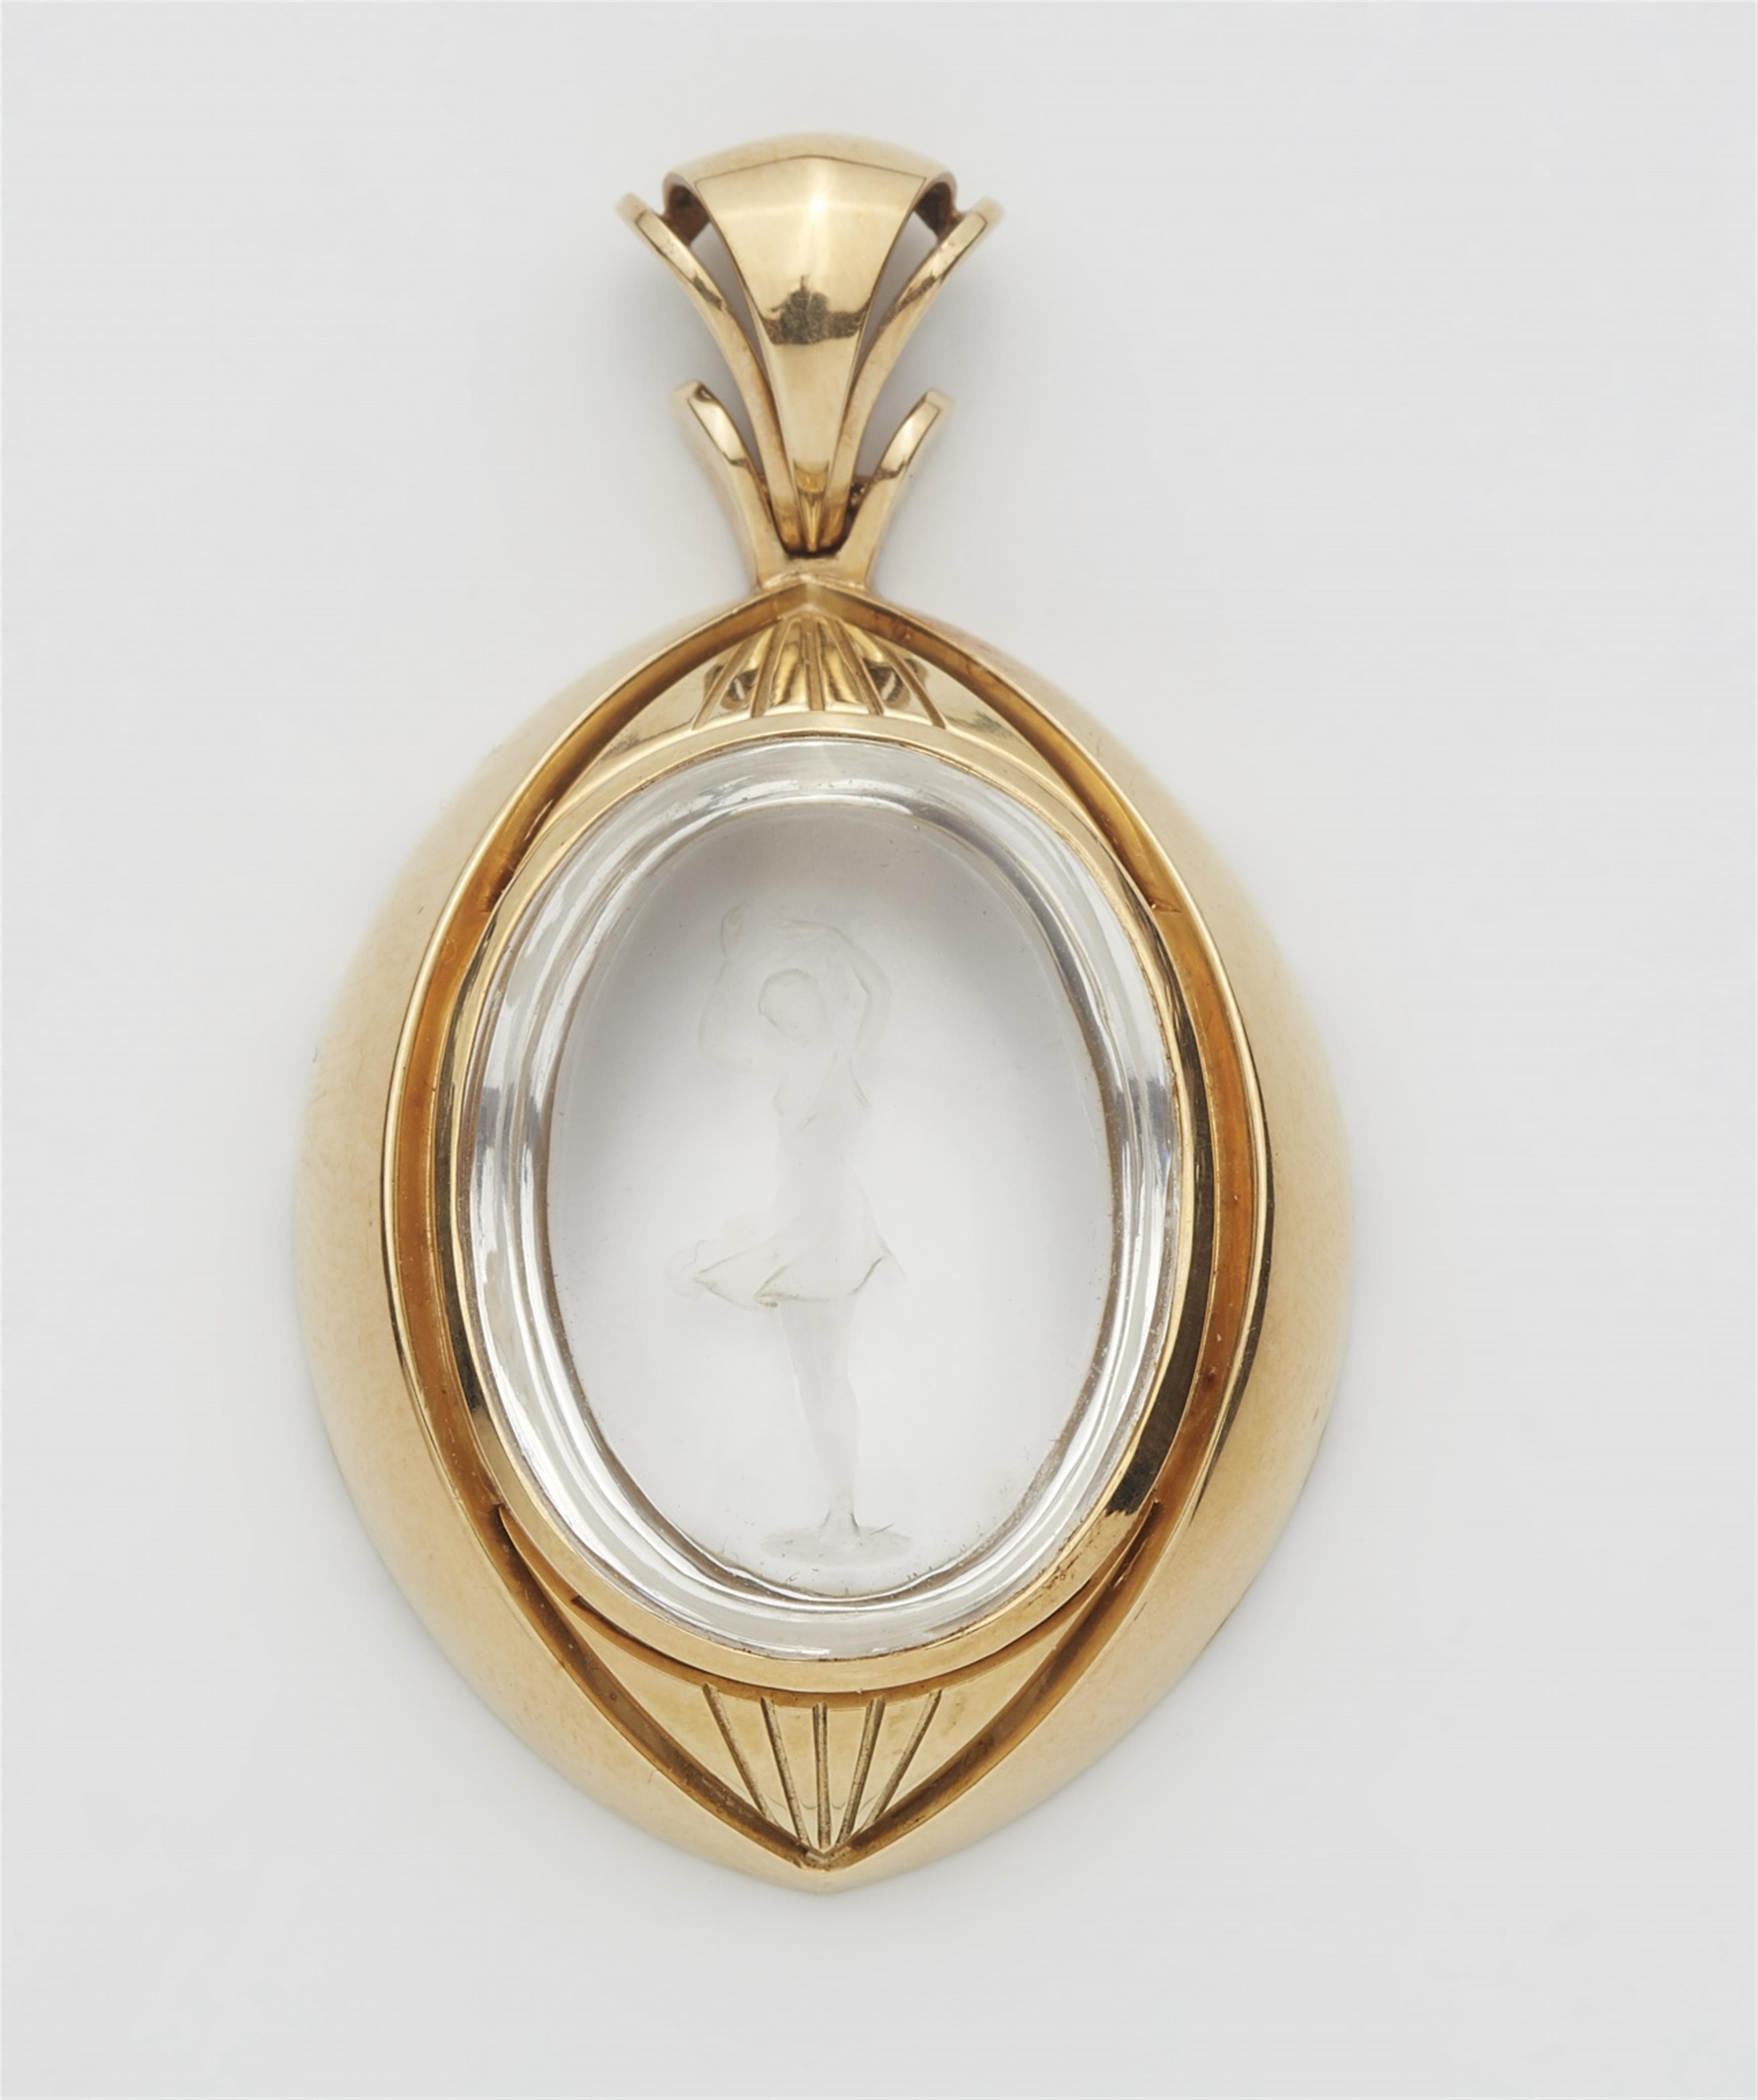 A 14k gold mounted rock crystal intaglio - image-1